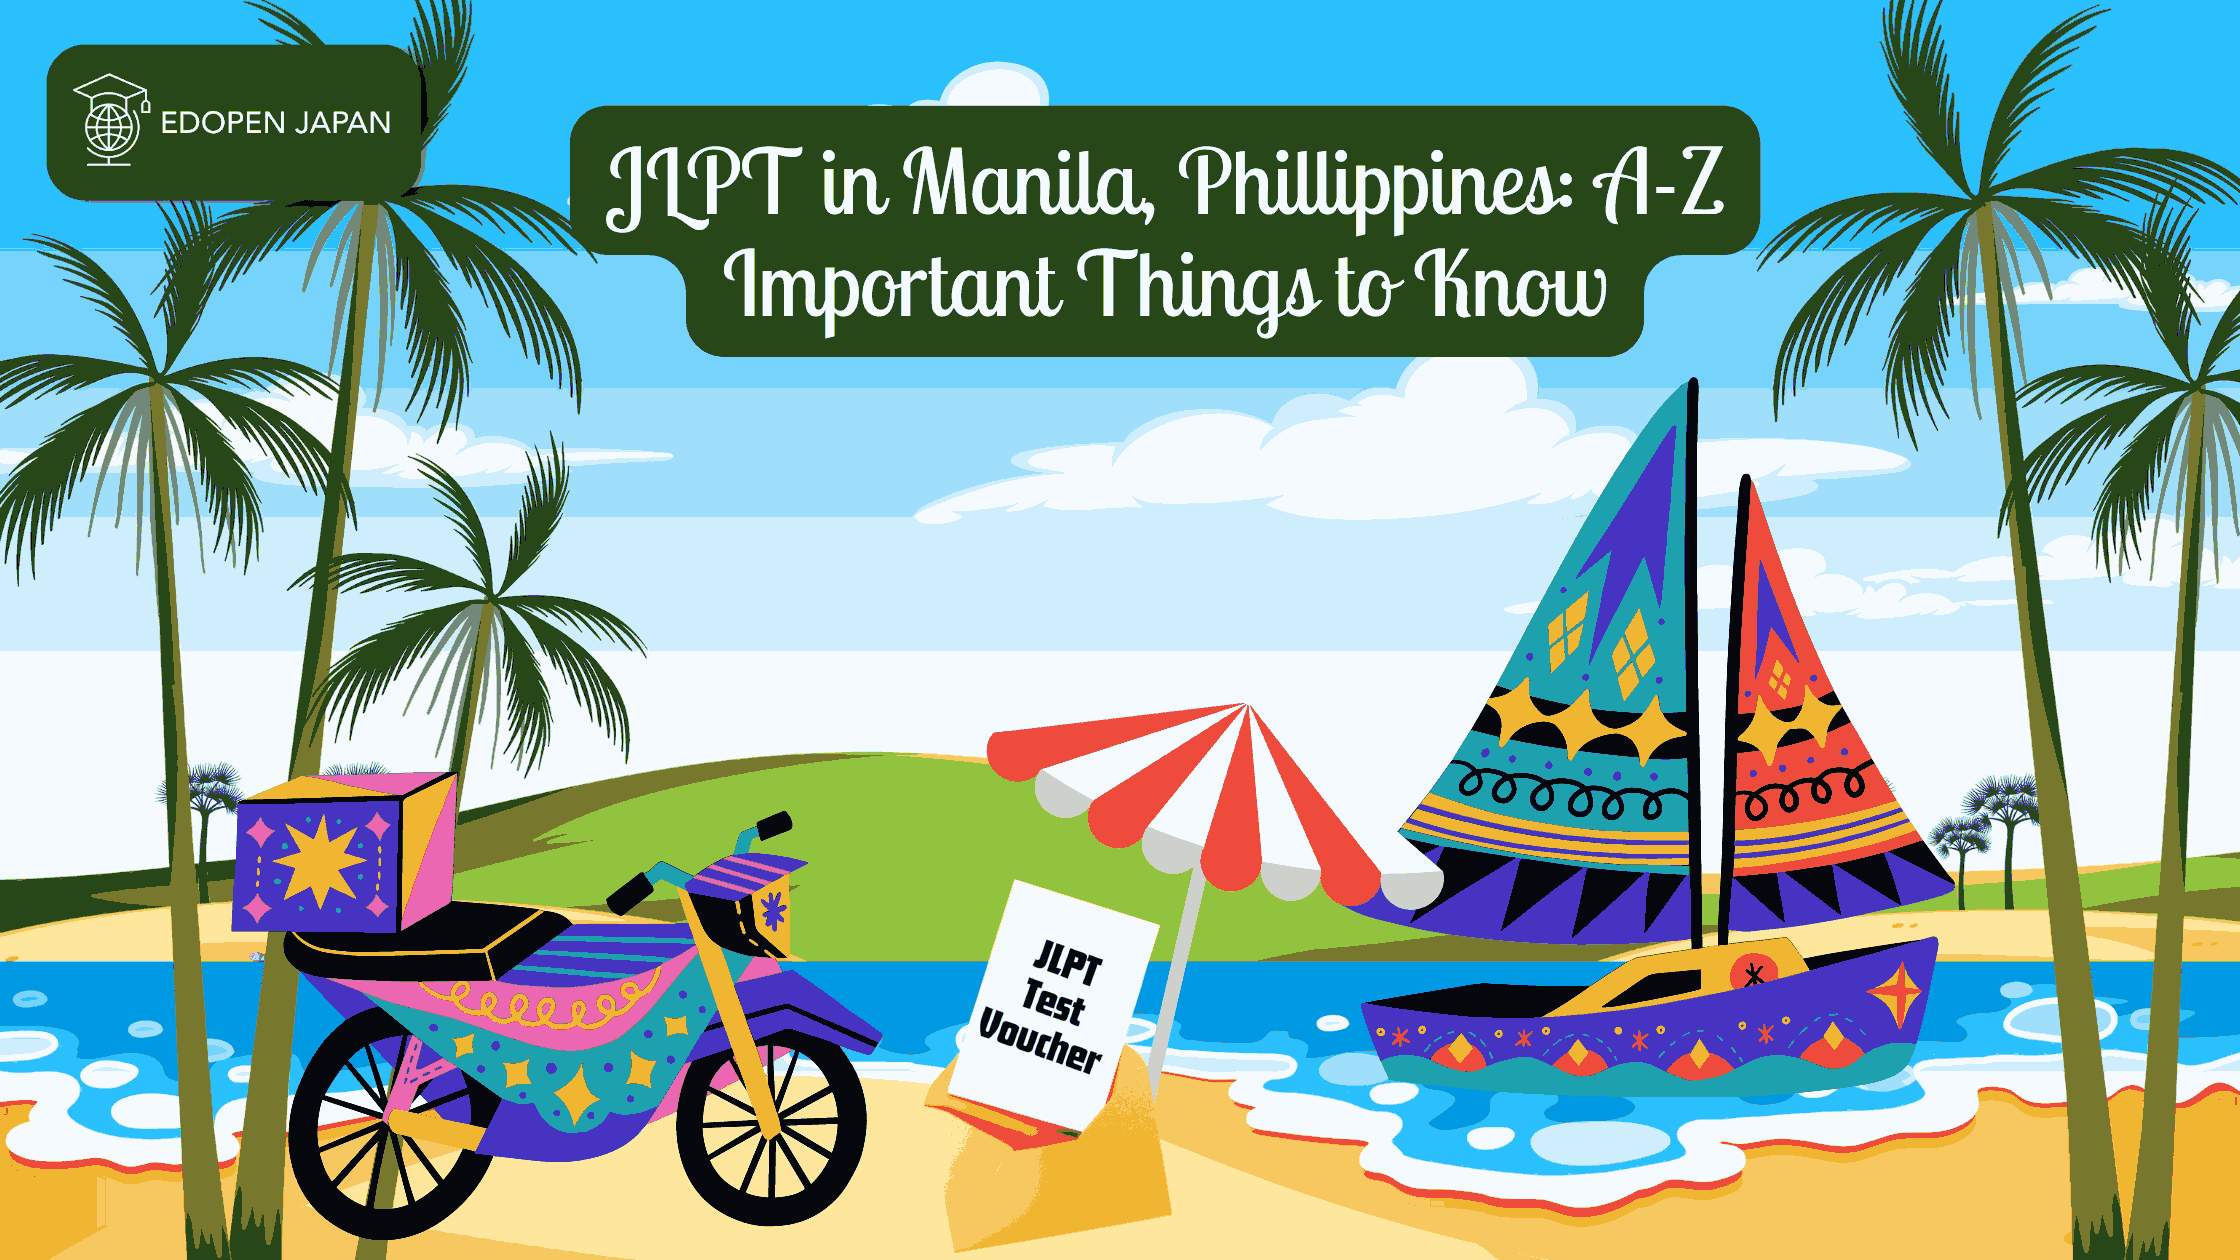 JLPT in Manila, Phillippines: A-Z Important Things to Know - EDOPEN Japan